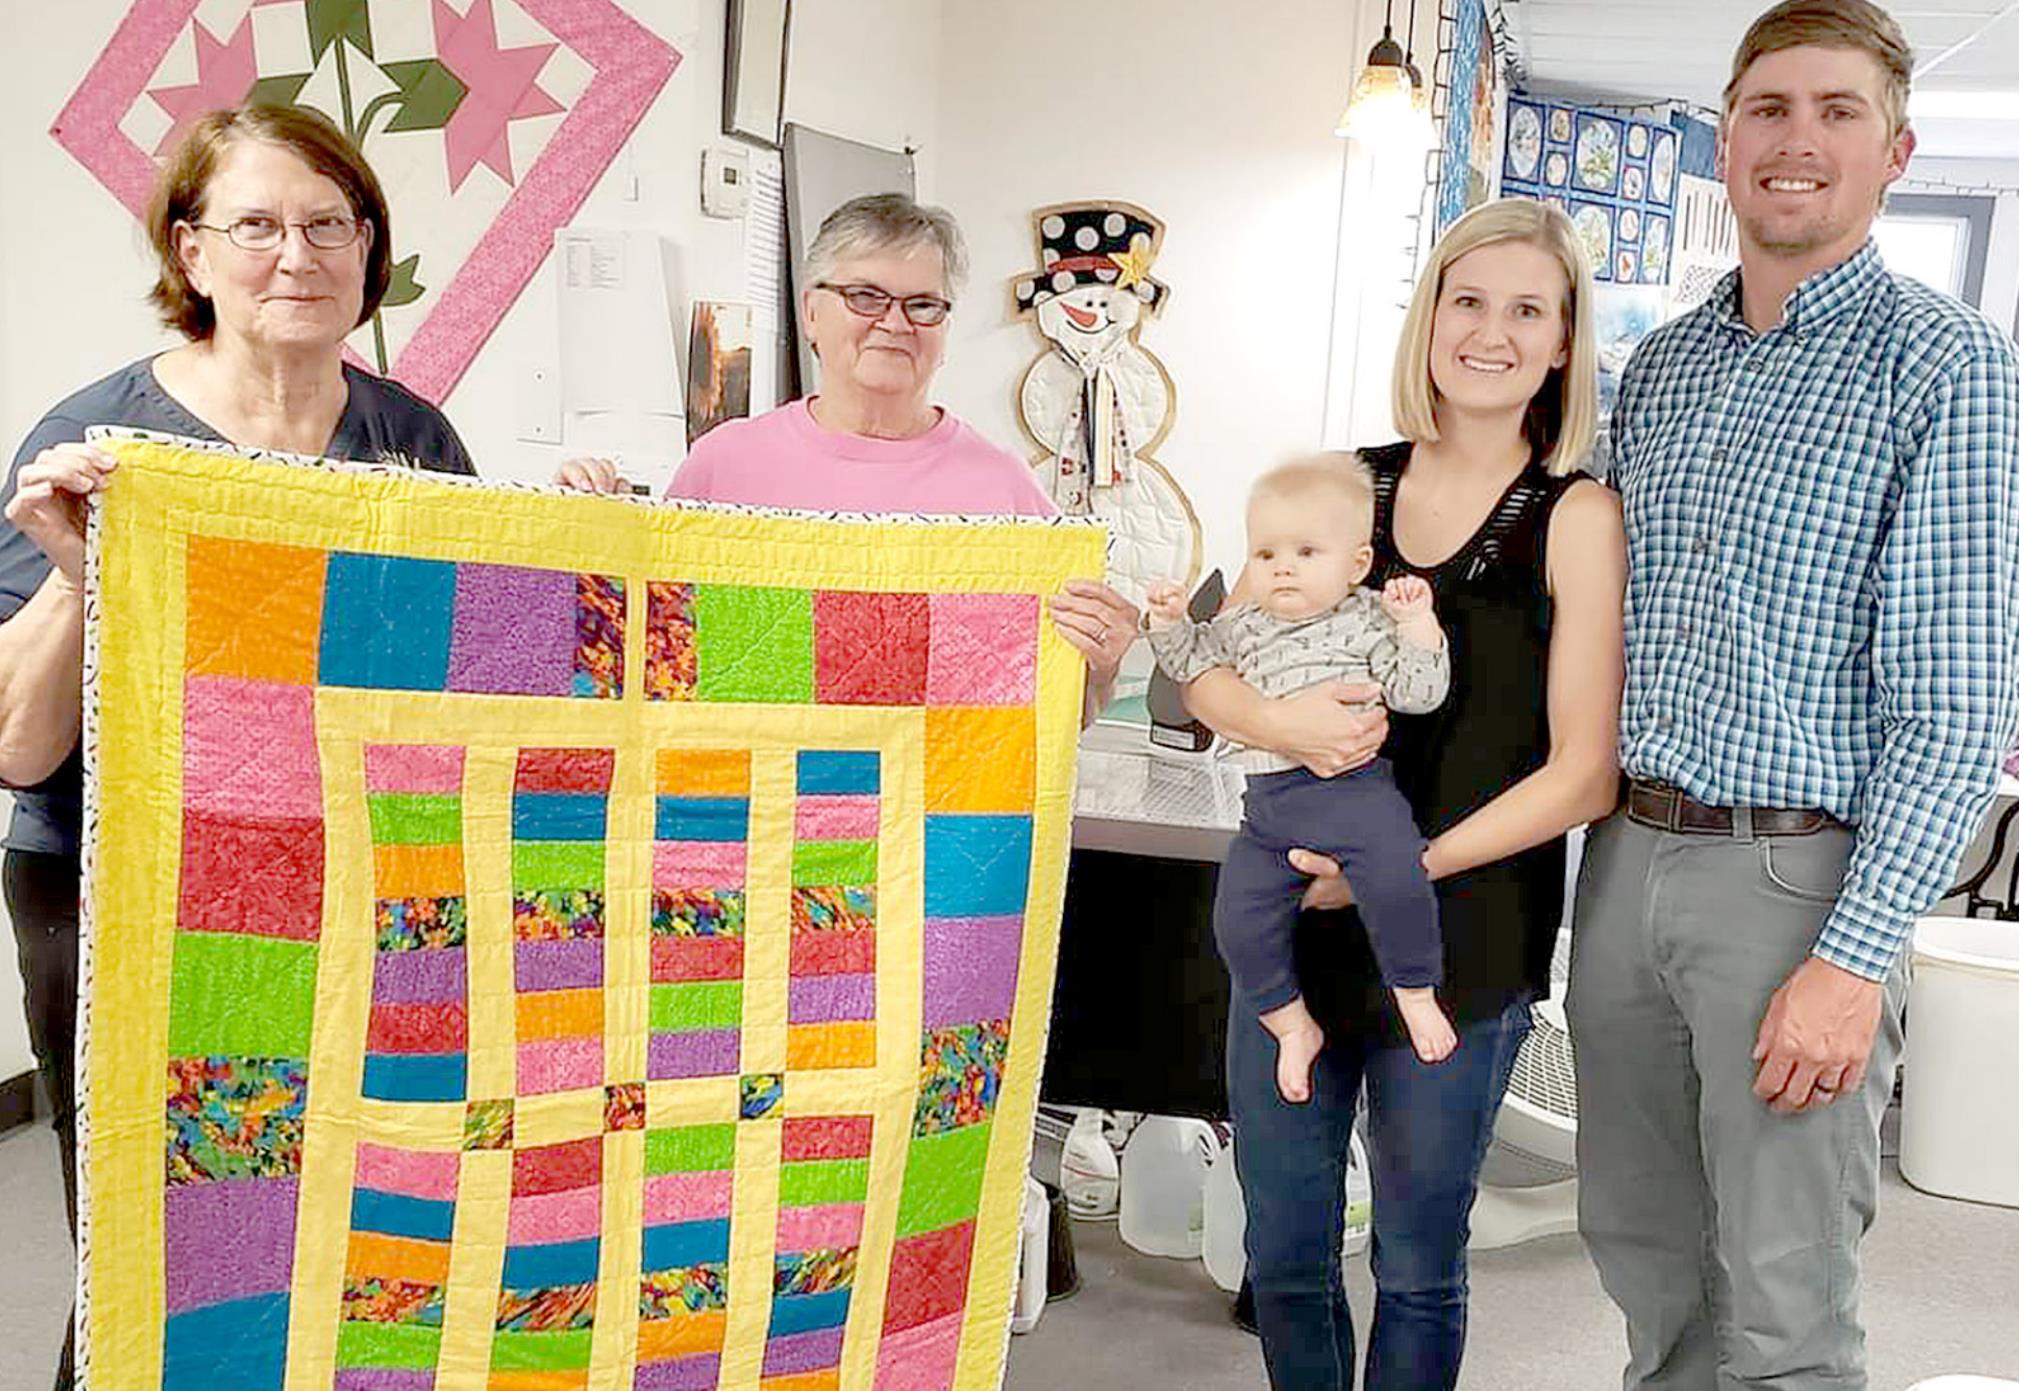 THE ROOKS COUNTY NEW YEAR’S BABY QUILT